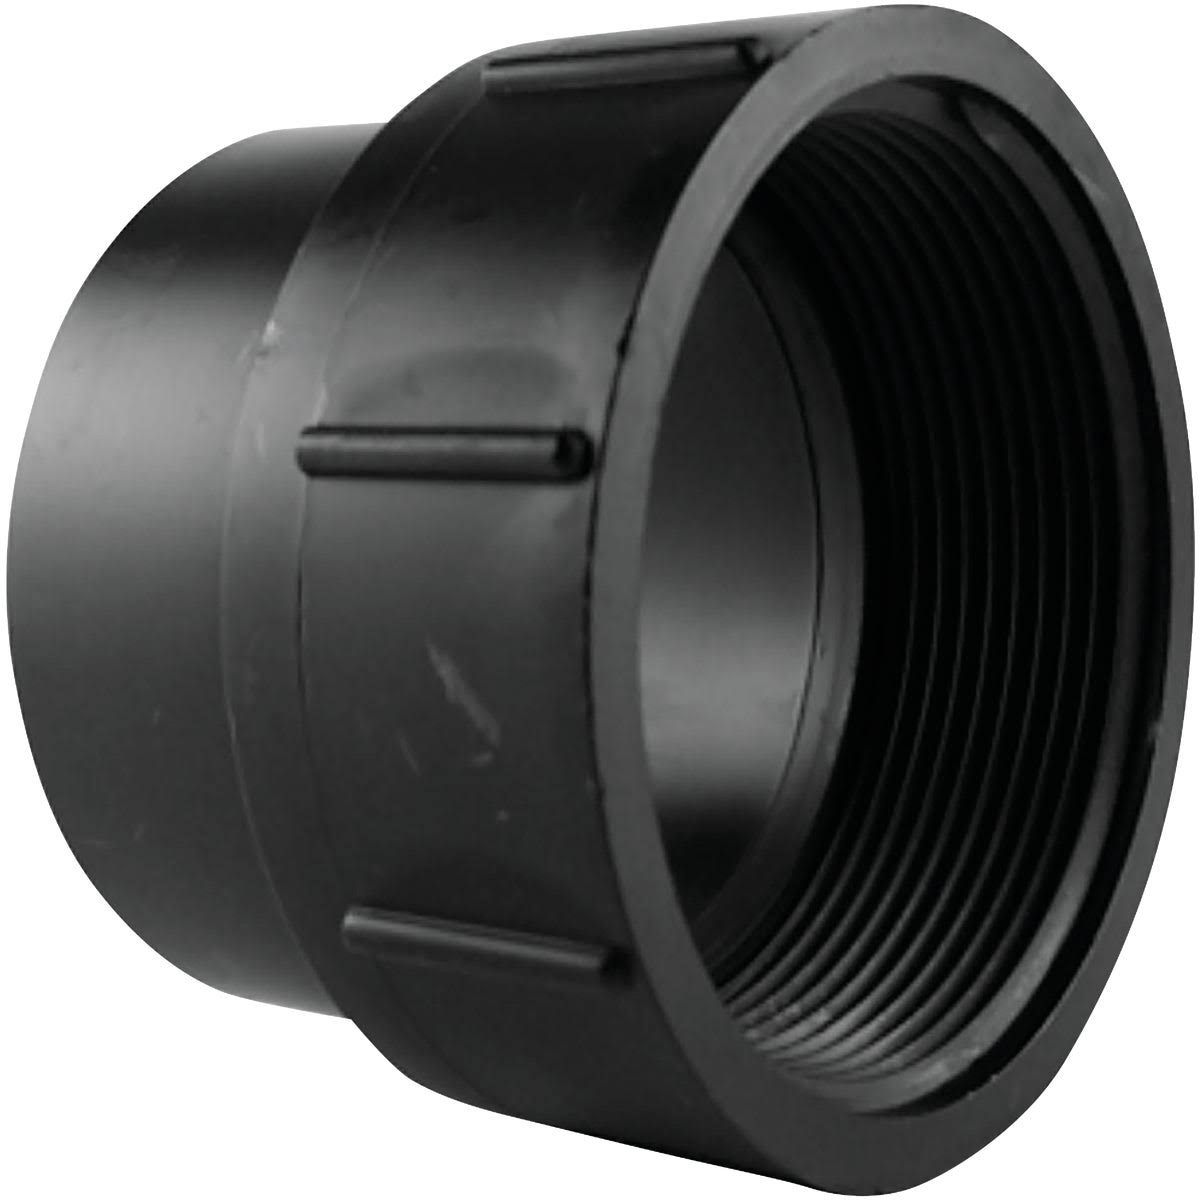 Charlotte Pipe and Foundry Fitting Cleanout Adapter - Black, 2"